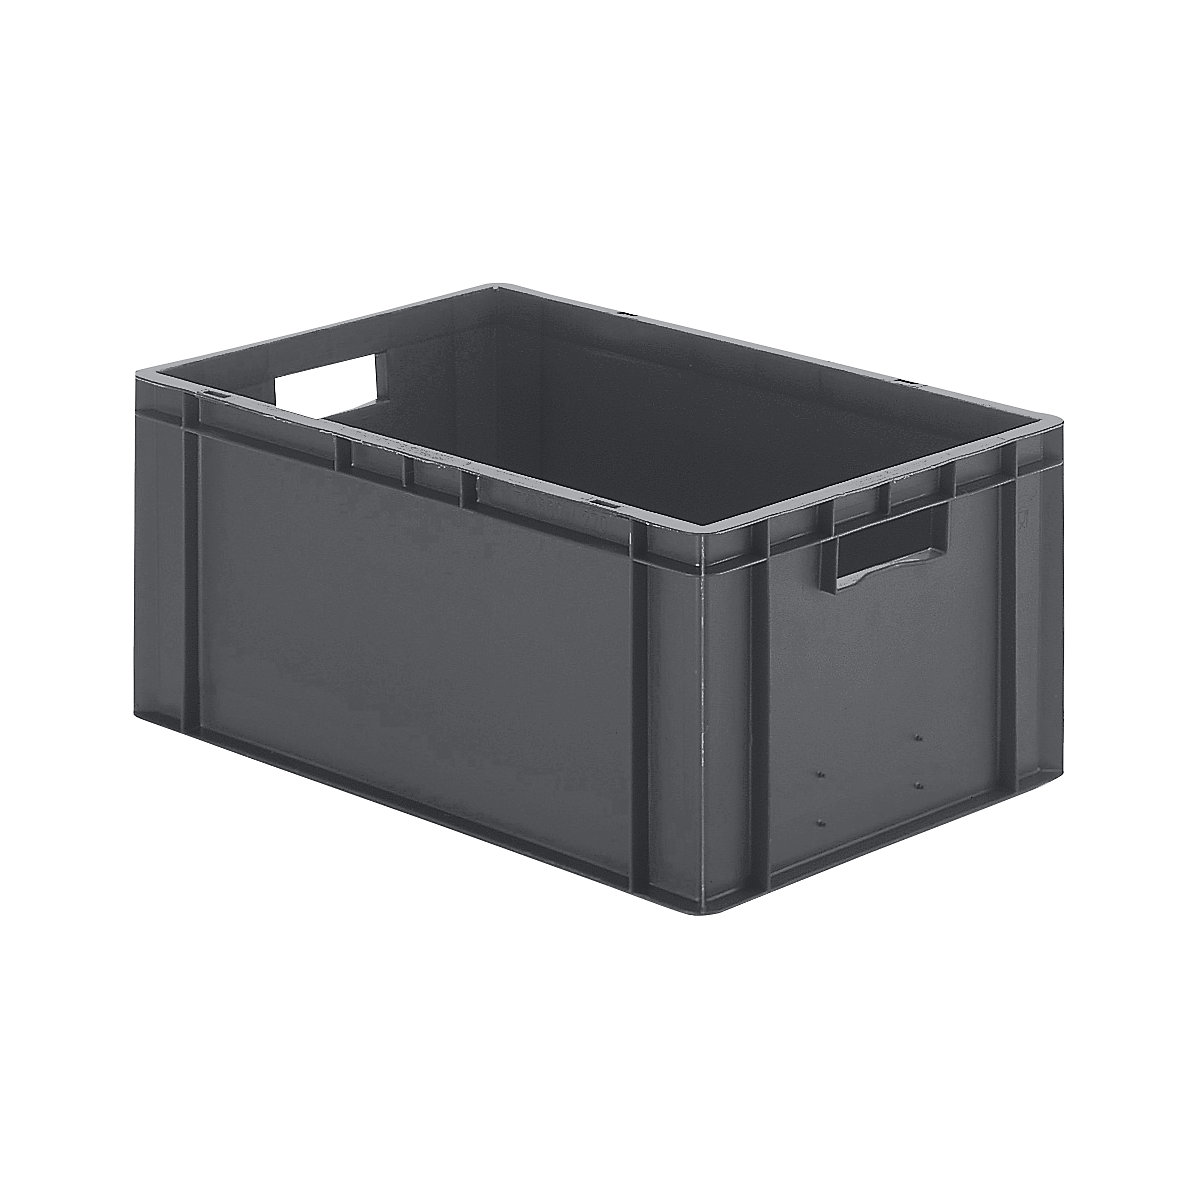 Euro stacking container, closed walls and base, LxWxH 600 x 400 x 270 mm, grey, pack of 5